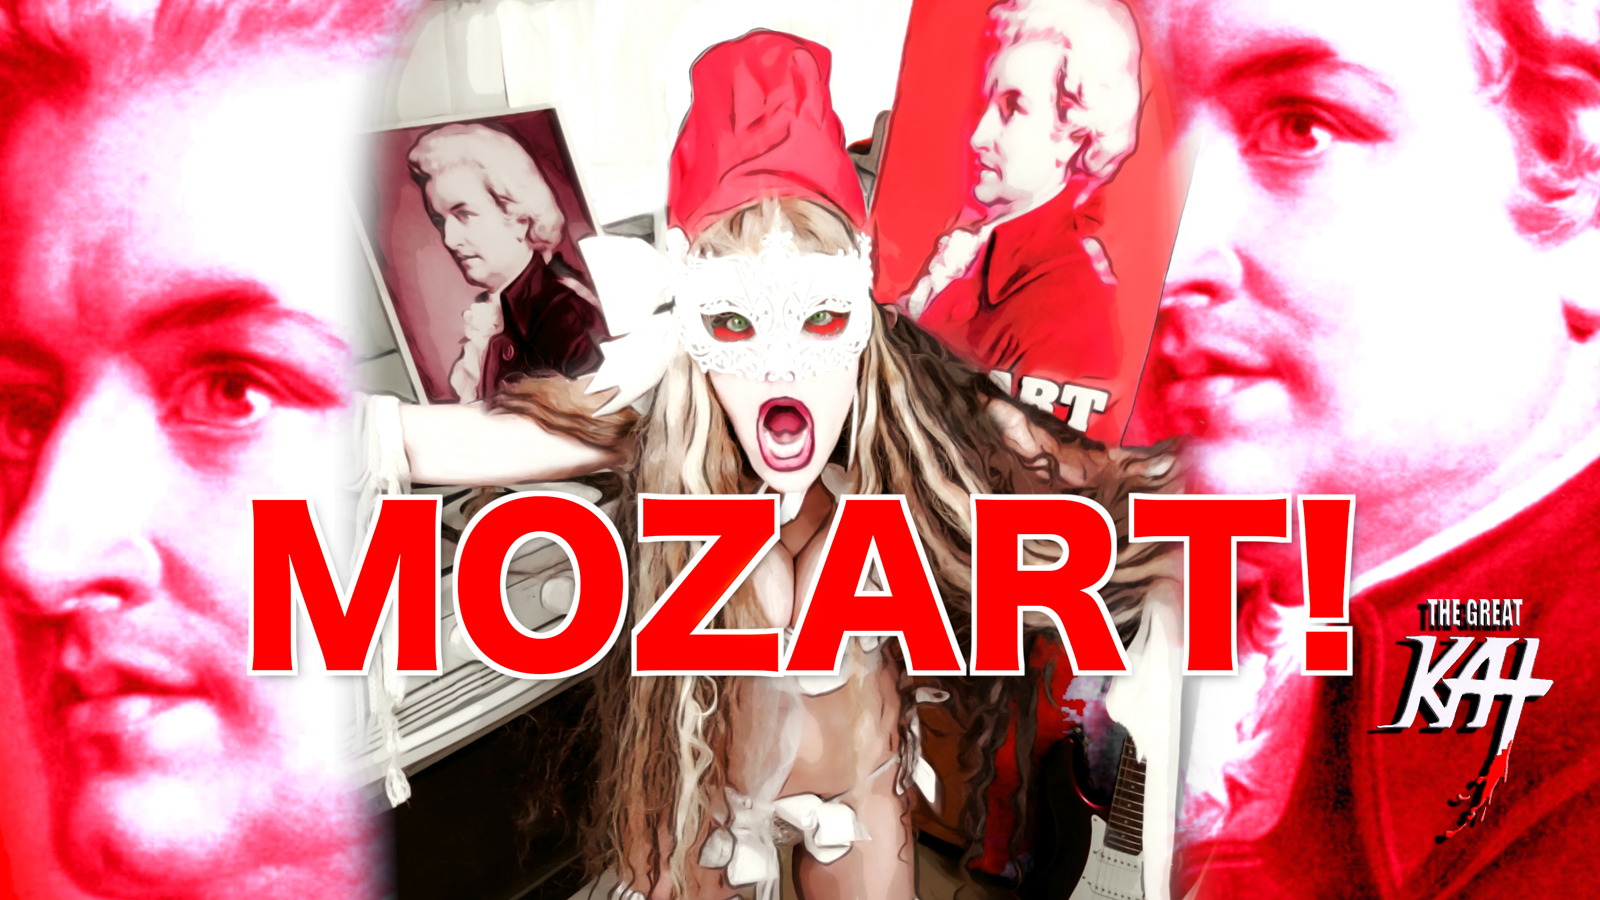 MOZART! From CHEF GREAT KAT BAKES GERMAN APPLE STRUDEL WITH MOZART!!